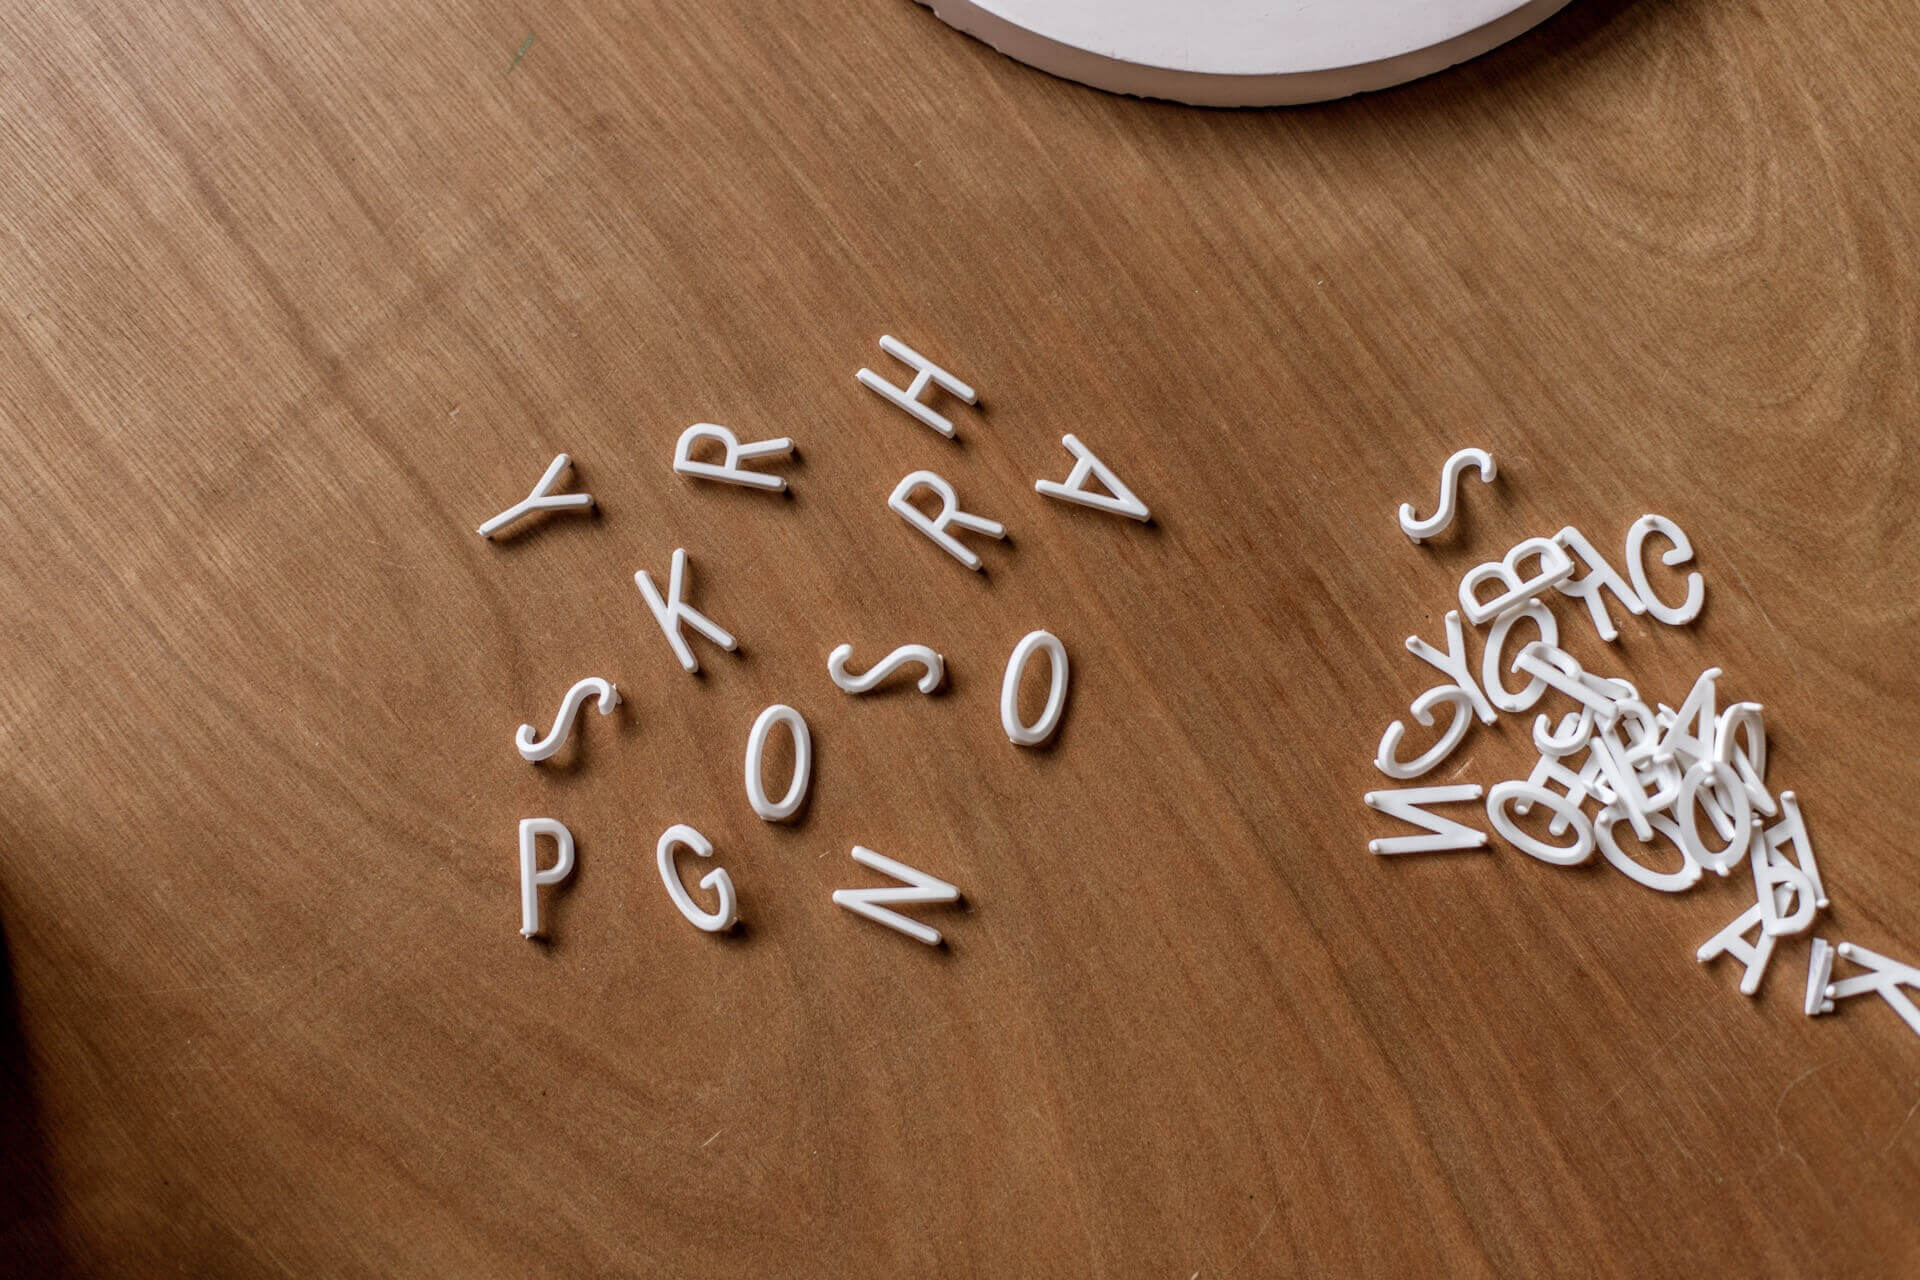 Some letters on a table that would make for a terrible brand identity